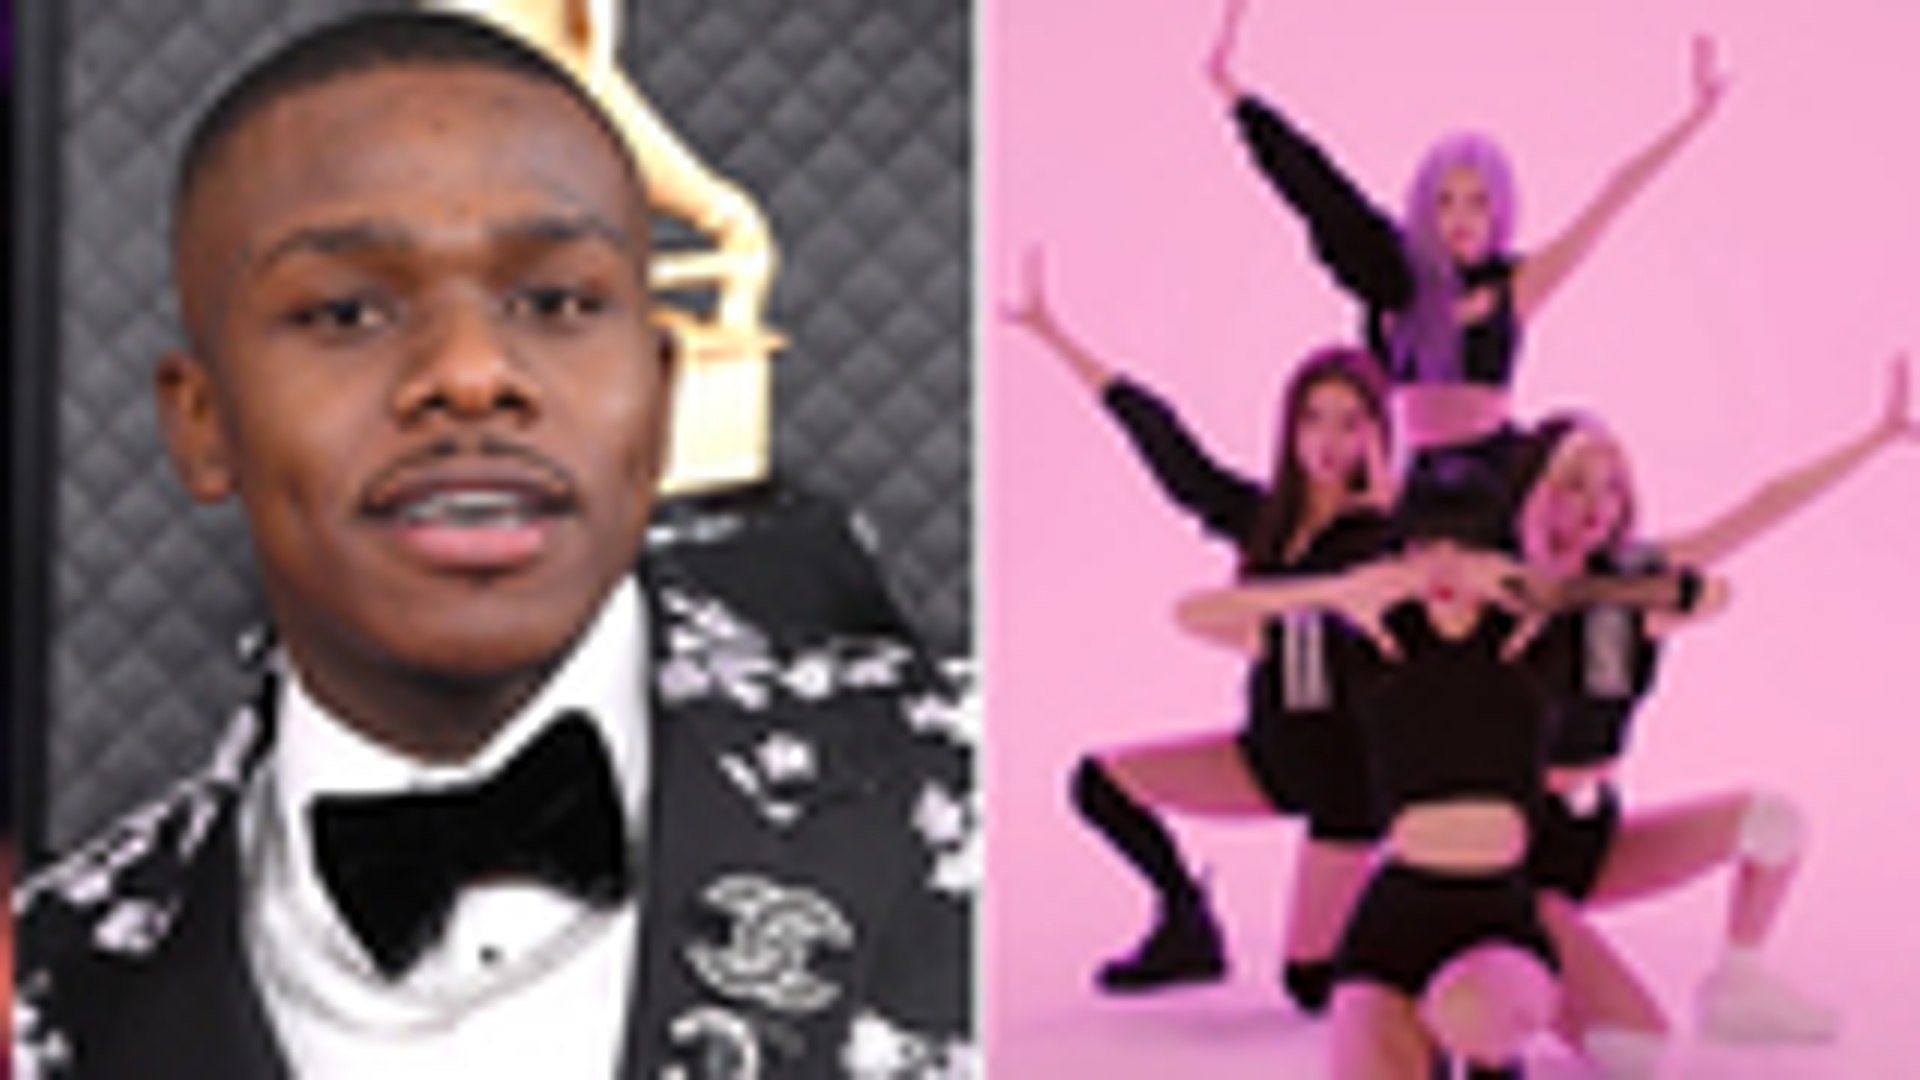 DaBaby's Fourth Week at No. 1 on Hot 100, BLACKPINK's Choreography in New Dance Video &